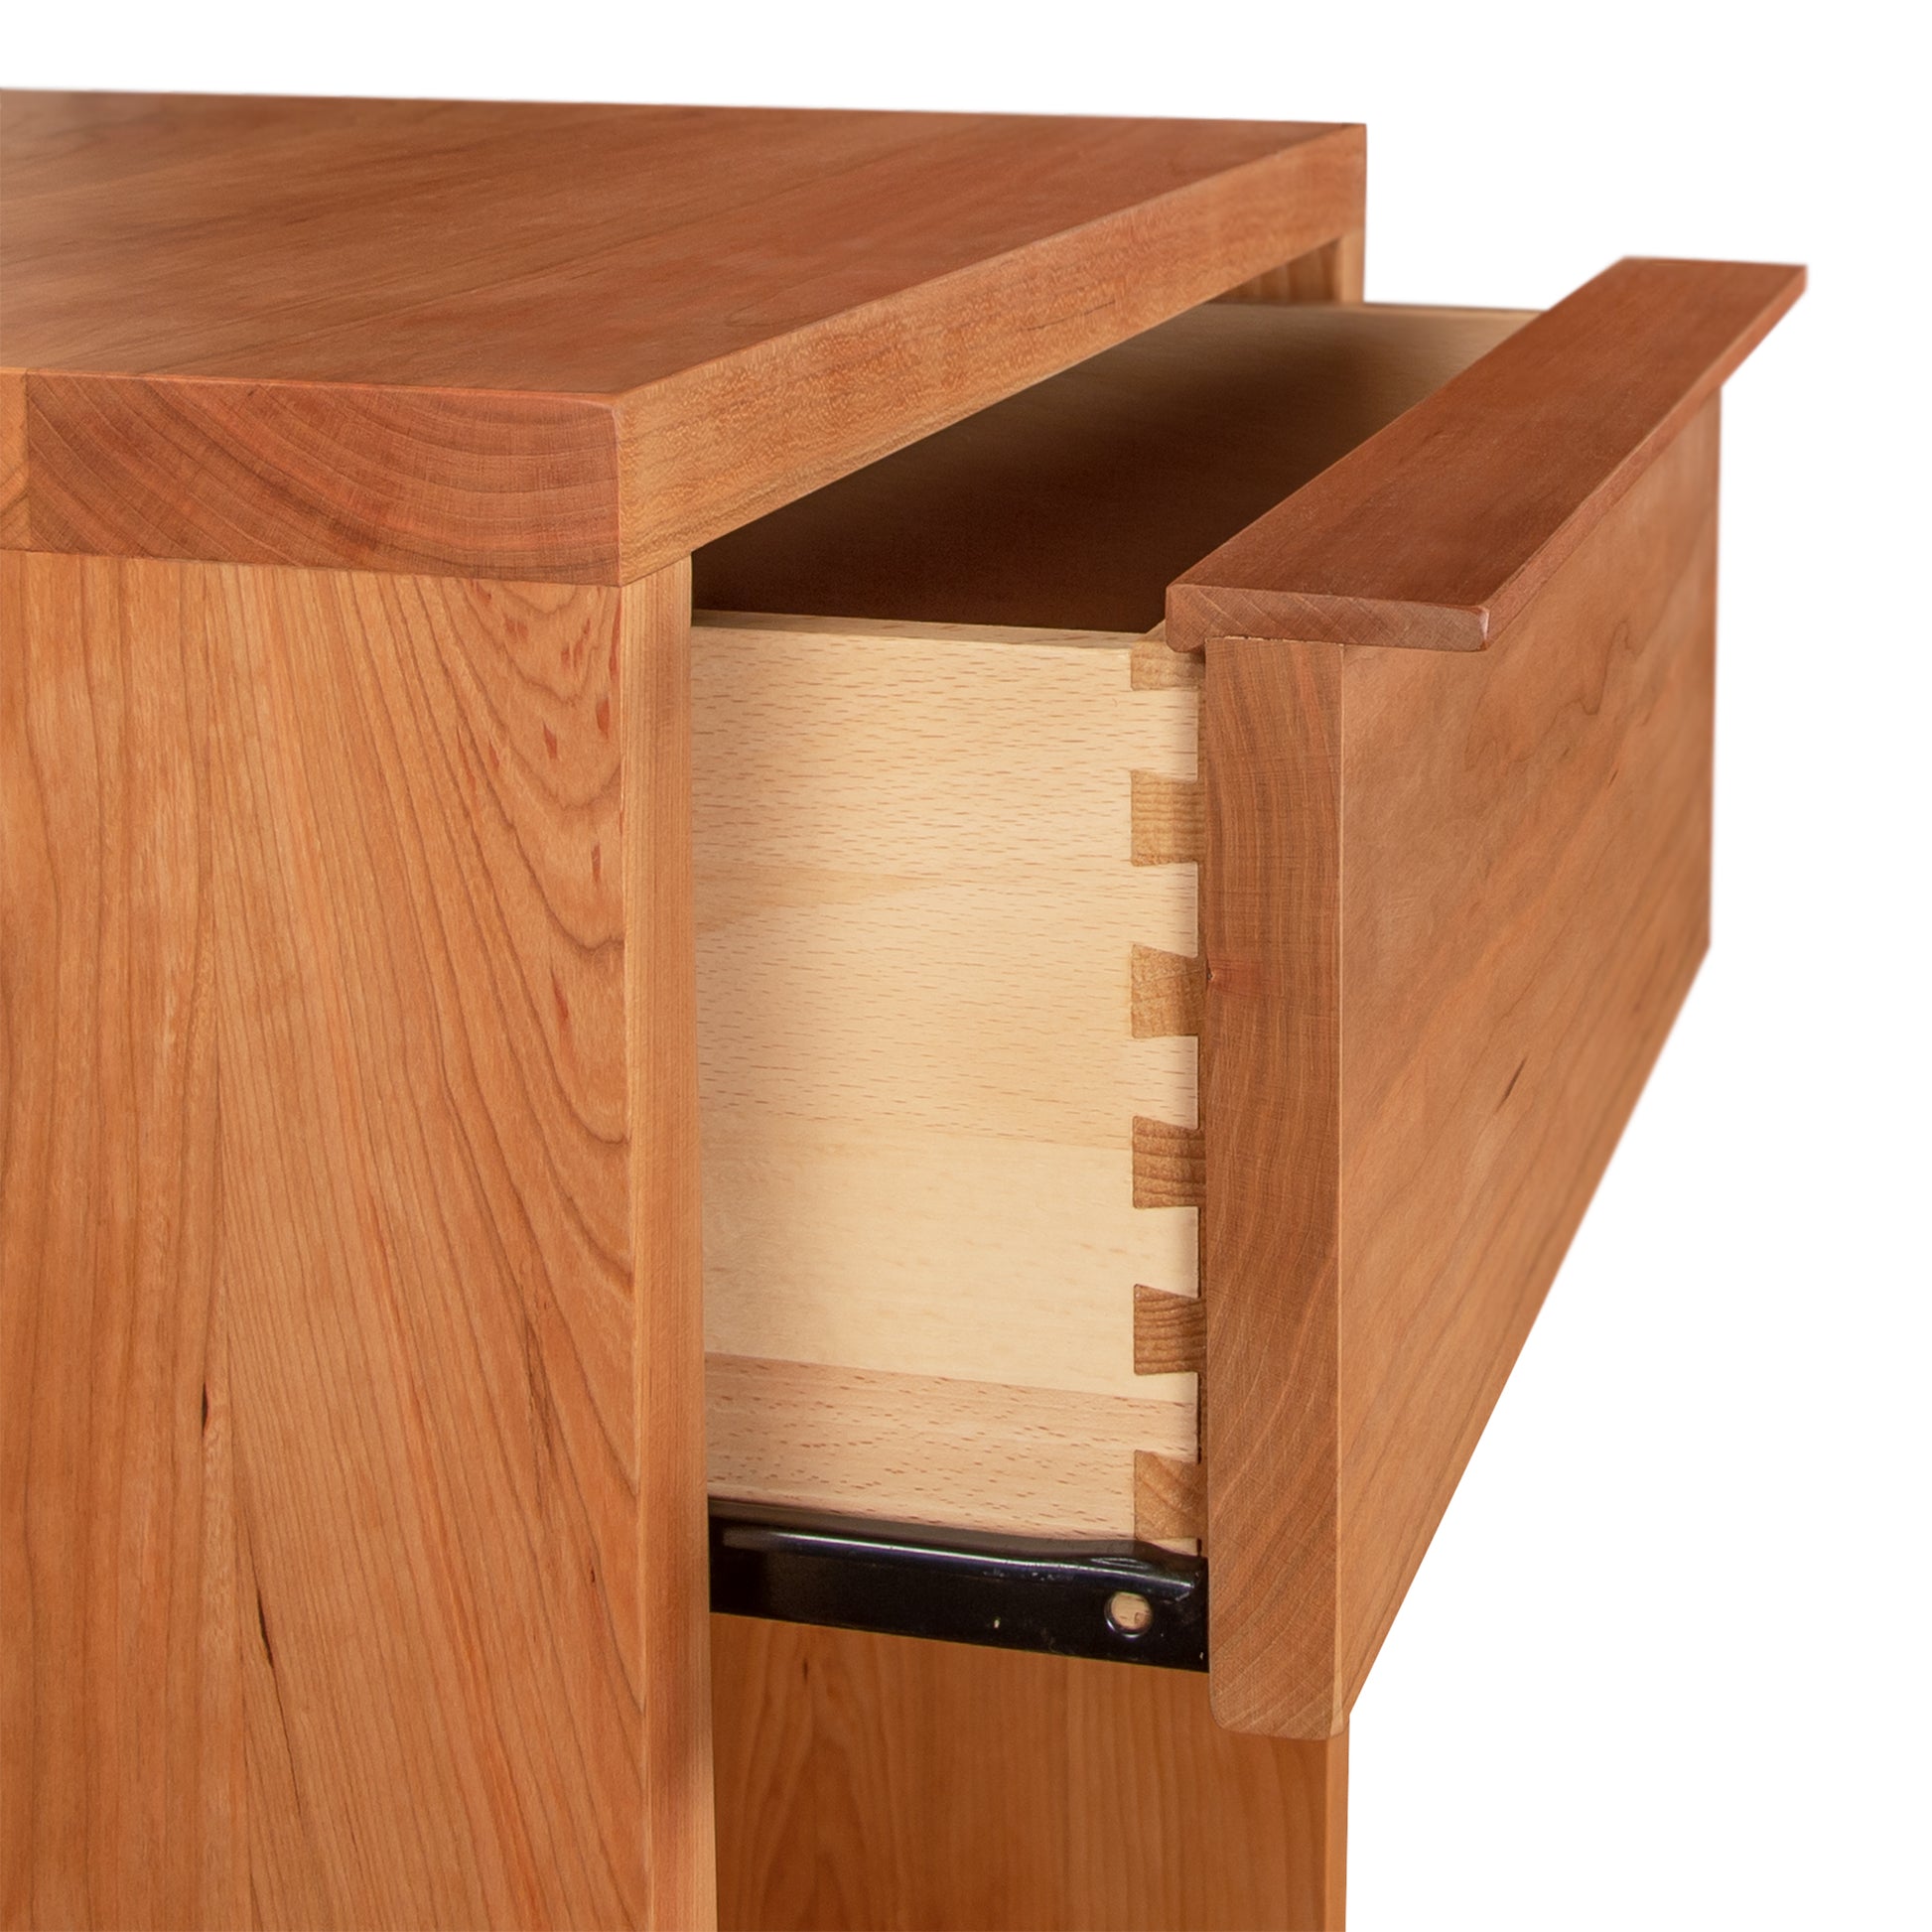 A wooden Vermont Furniture Designs Kipling 1-Drawer Enclosed Shelf Nightstand partially opened, revealing dovetail joint construction in a natural cherry finish.